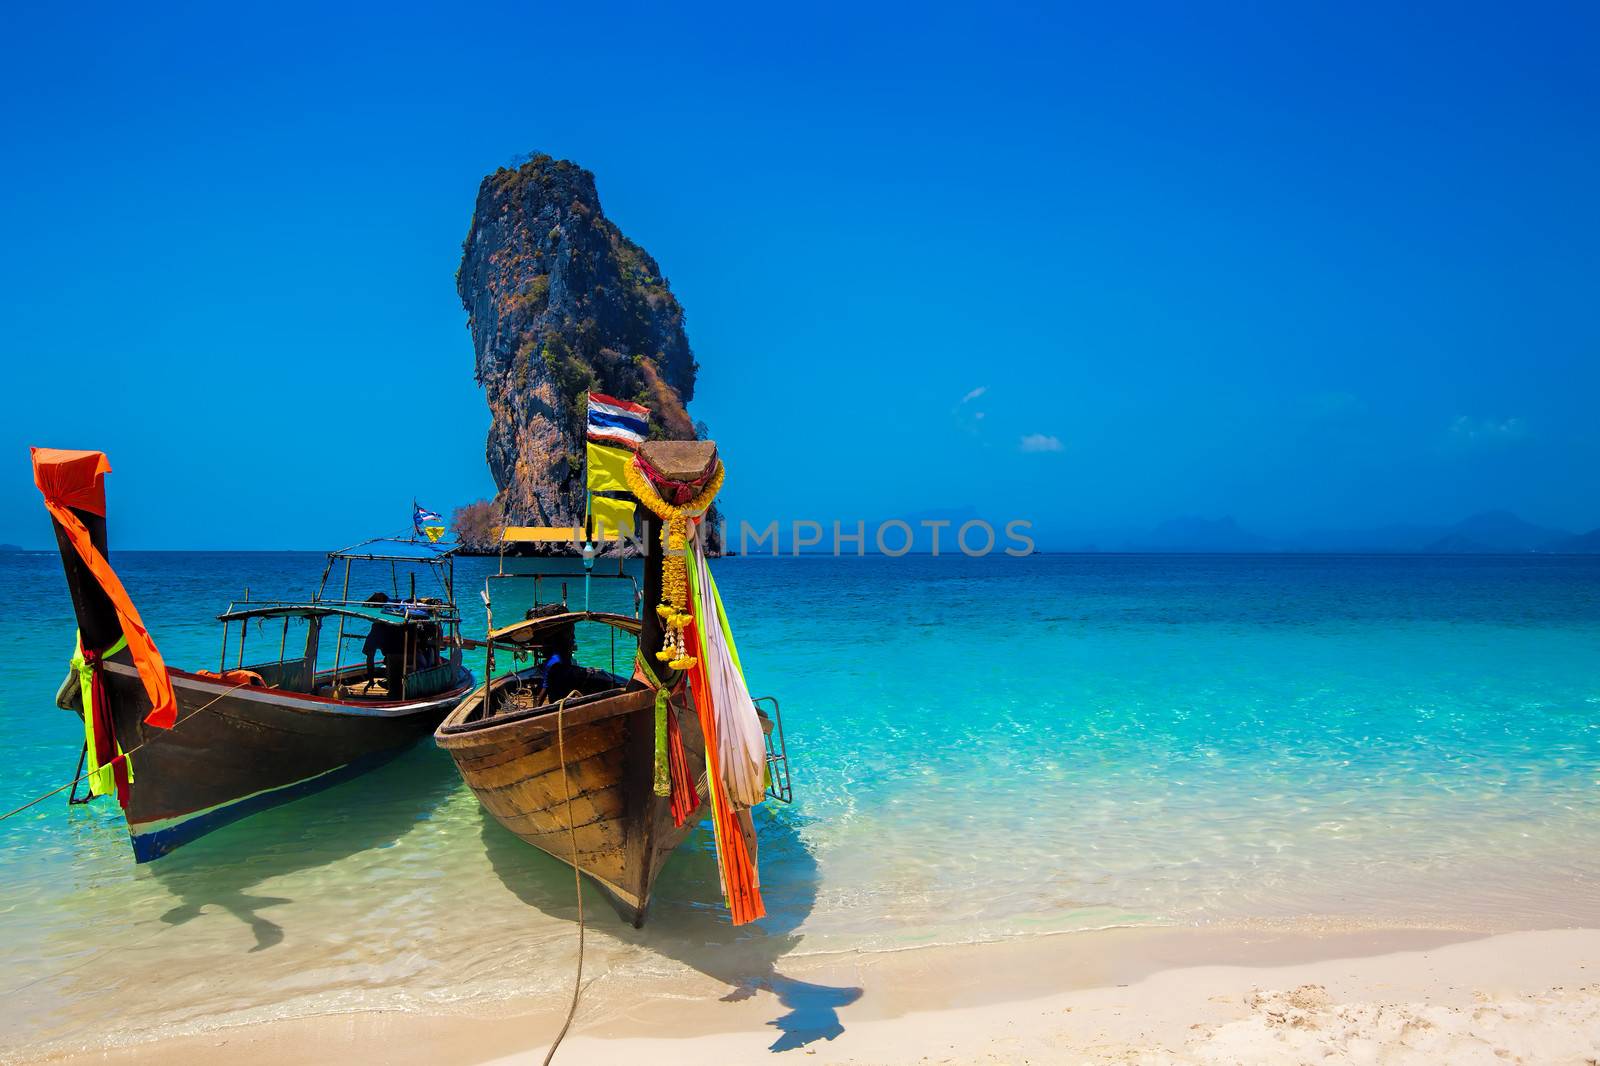 Poda Island surrounded by blue skies and crystal clear water